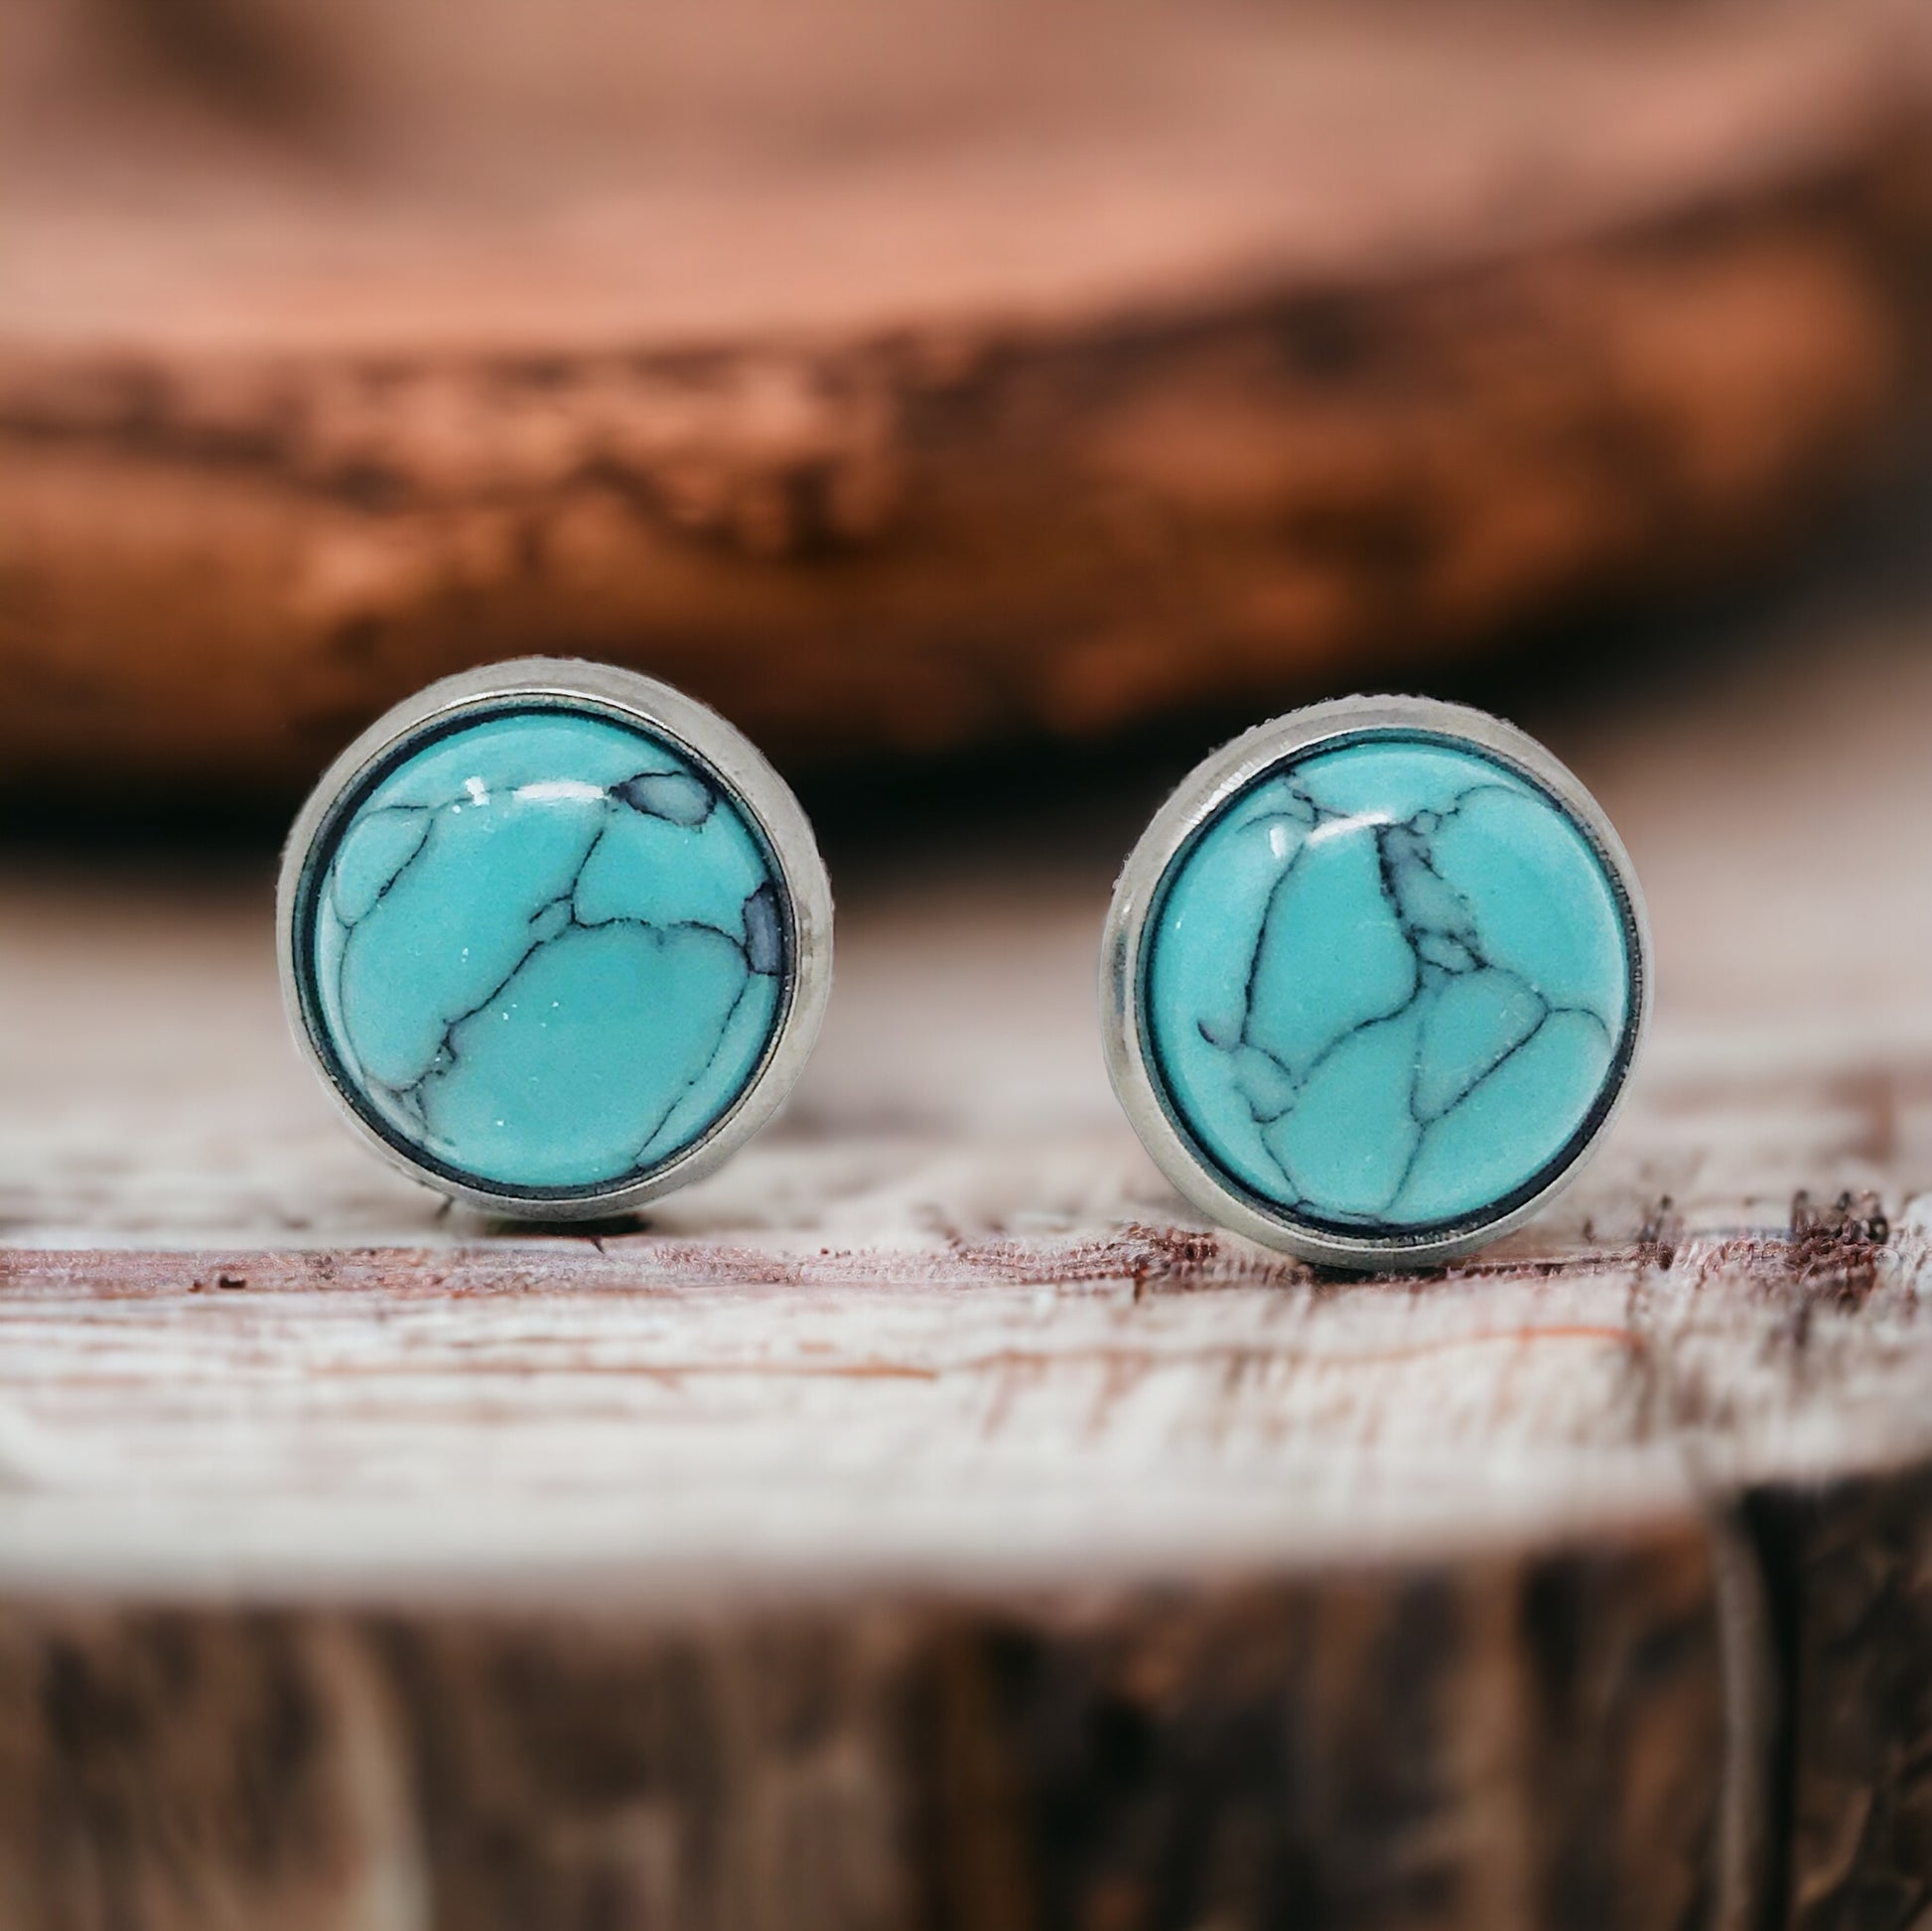 Turquoise 10mm Stud Earrings: Boho Western Chic Accessories